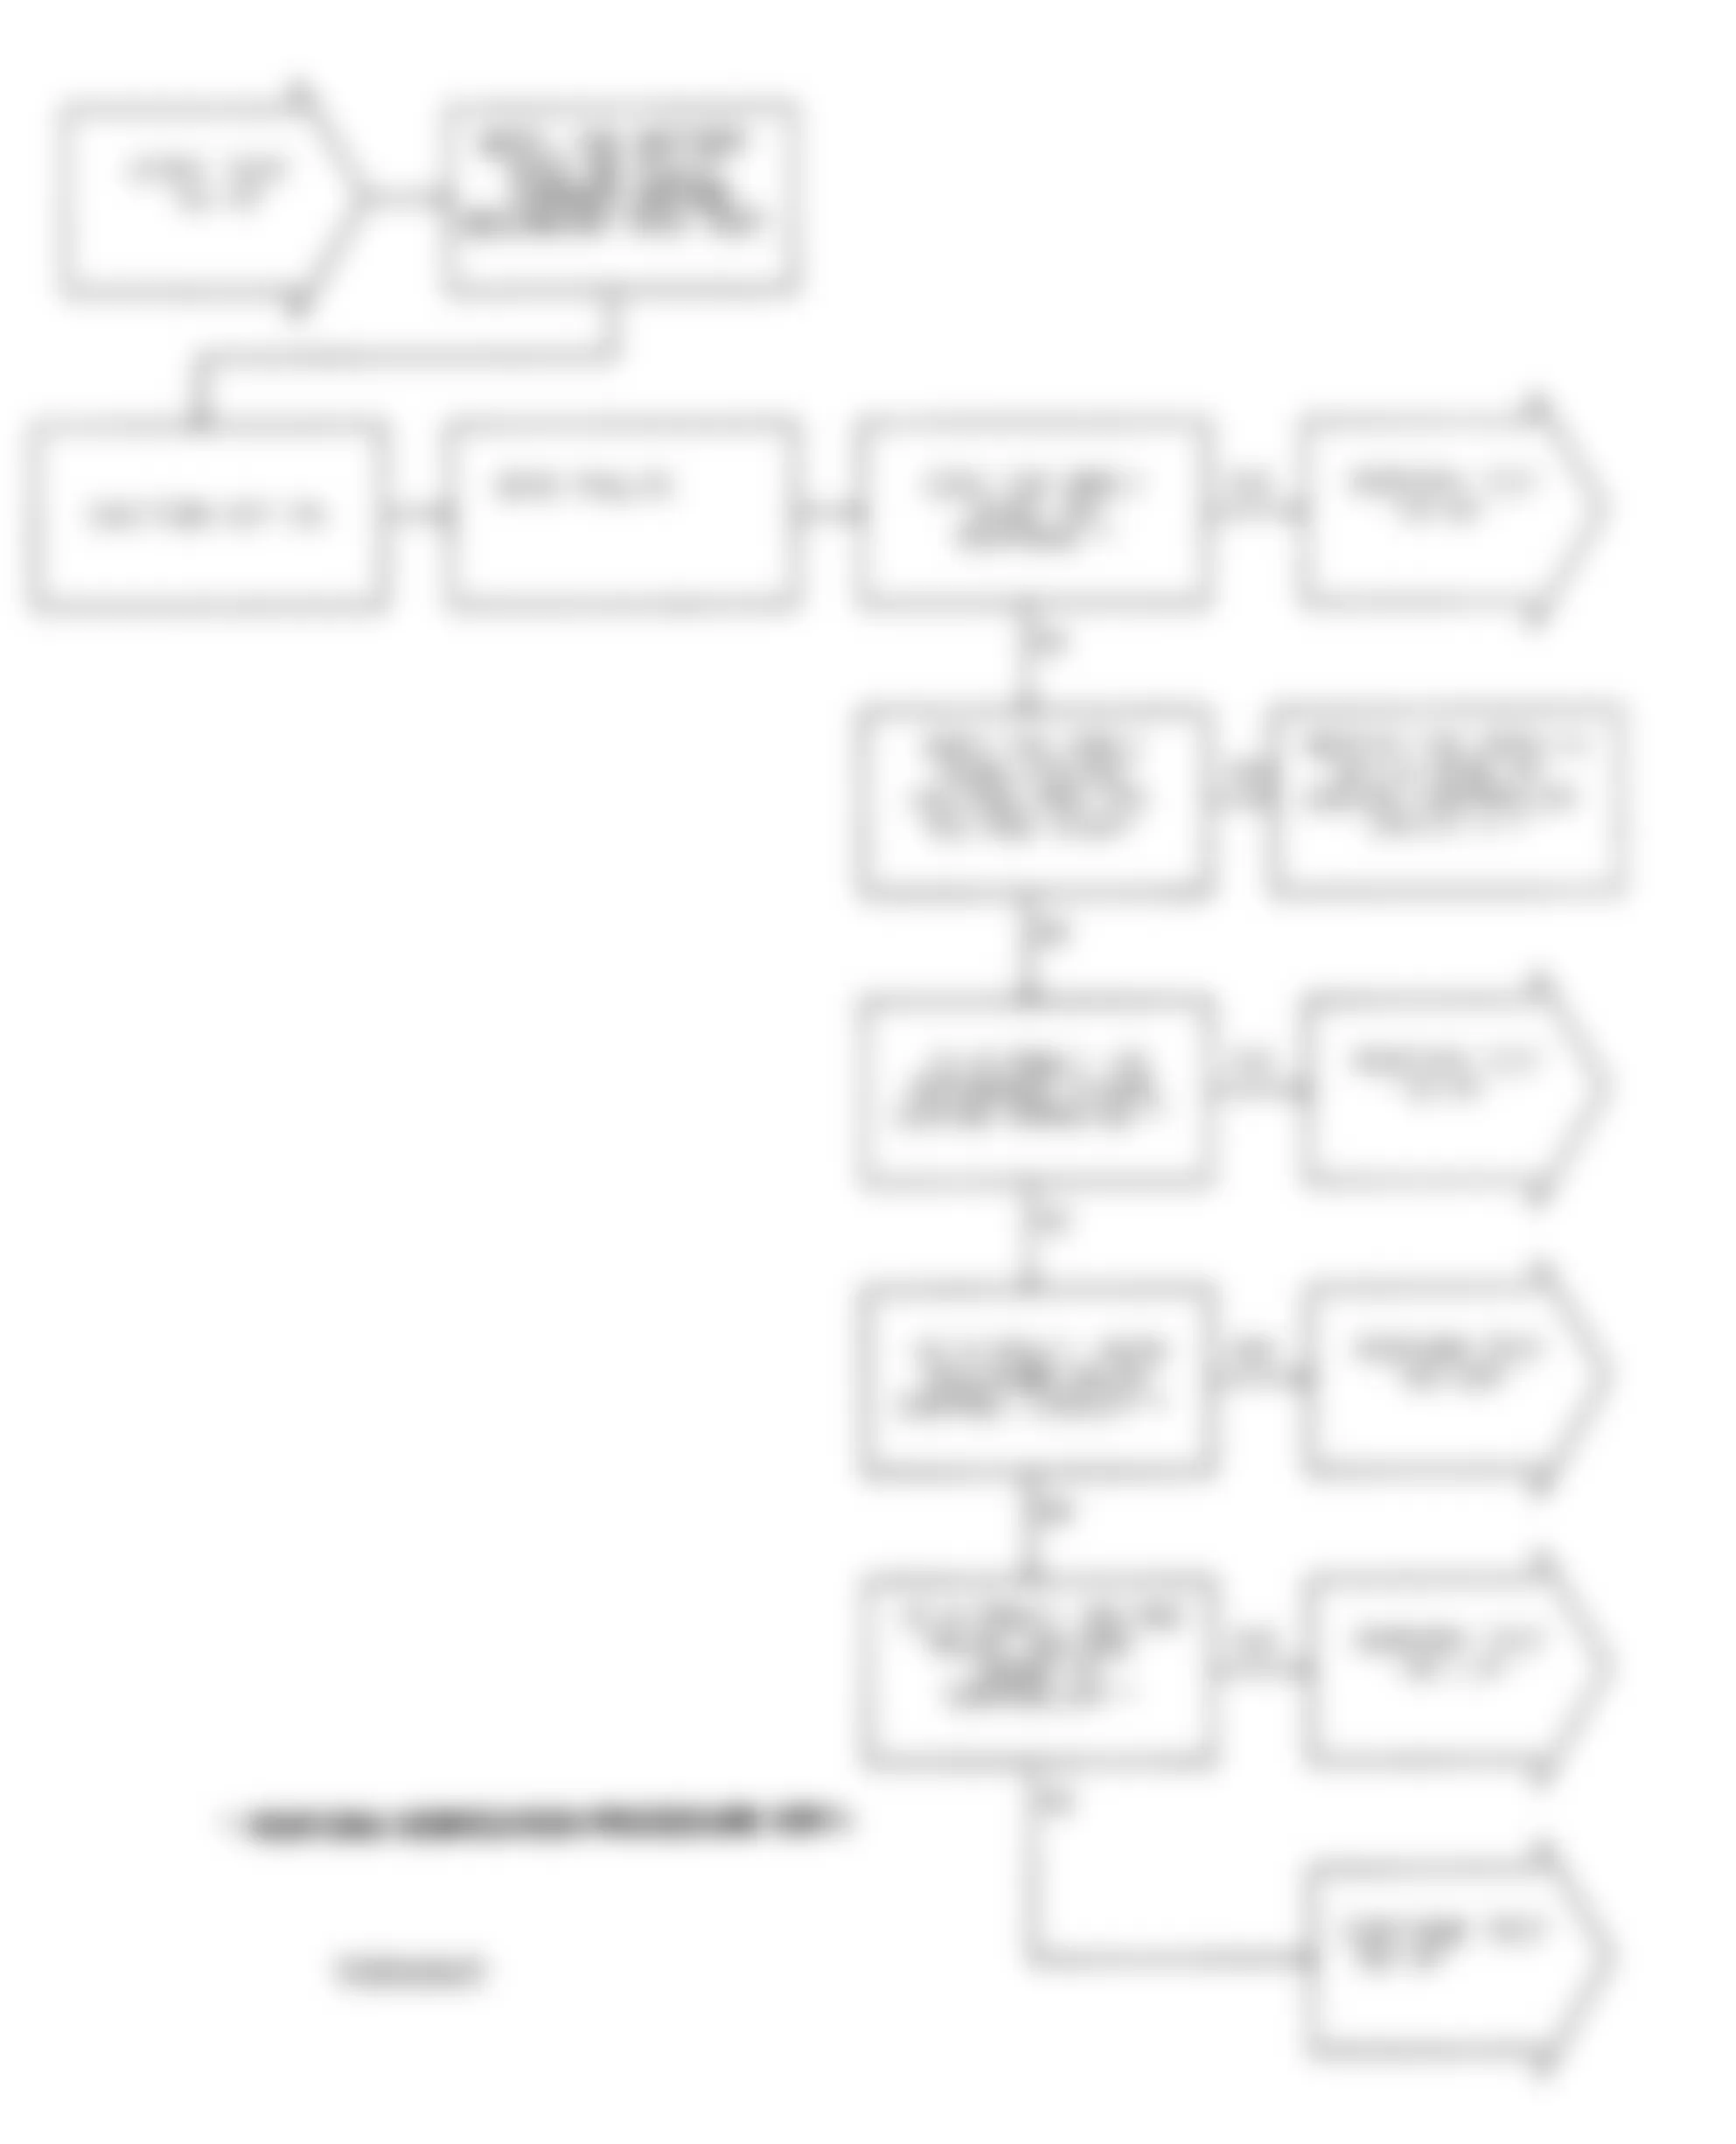 Chrysler LeBaron GTC 1991 - Component Locations -  Test NS-1A, Diagnostic Flow Chart (1 of 4)